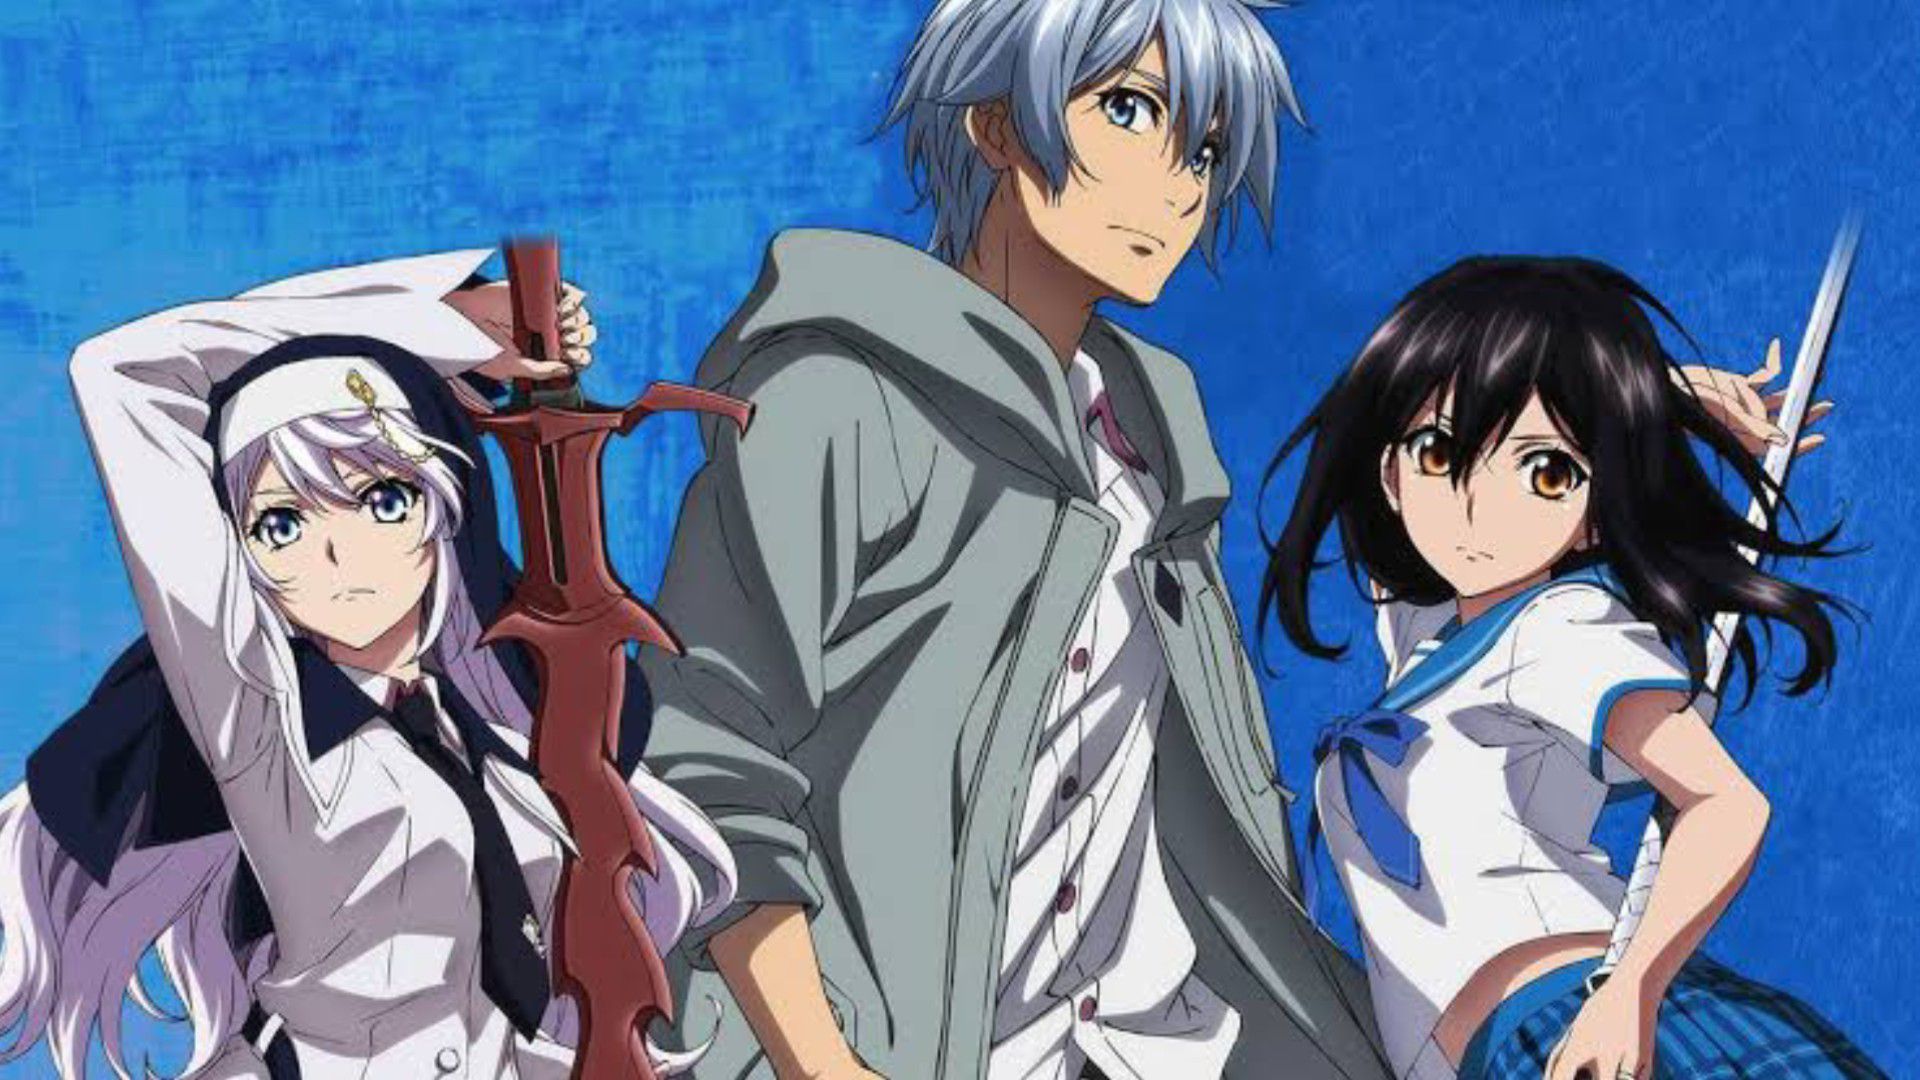 Anime Review: Strike the Blood - Episode 11 - Blerds Online